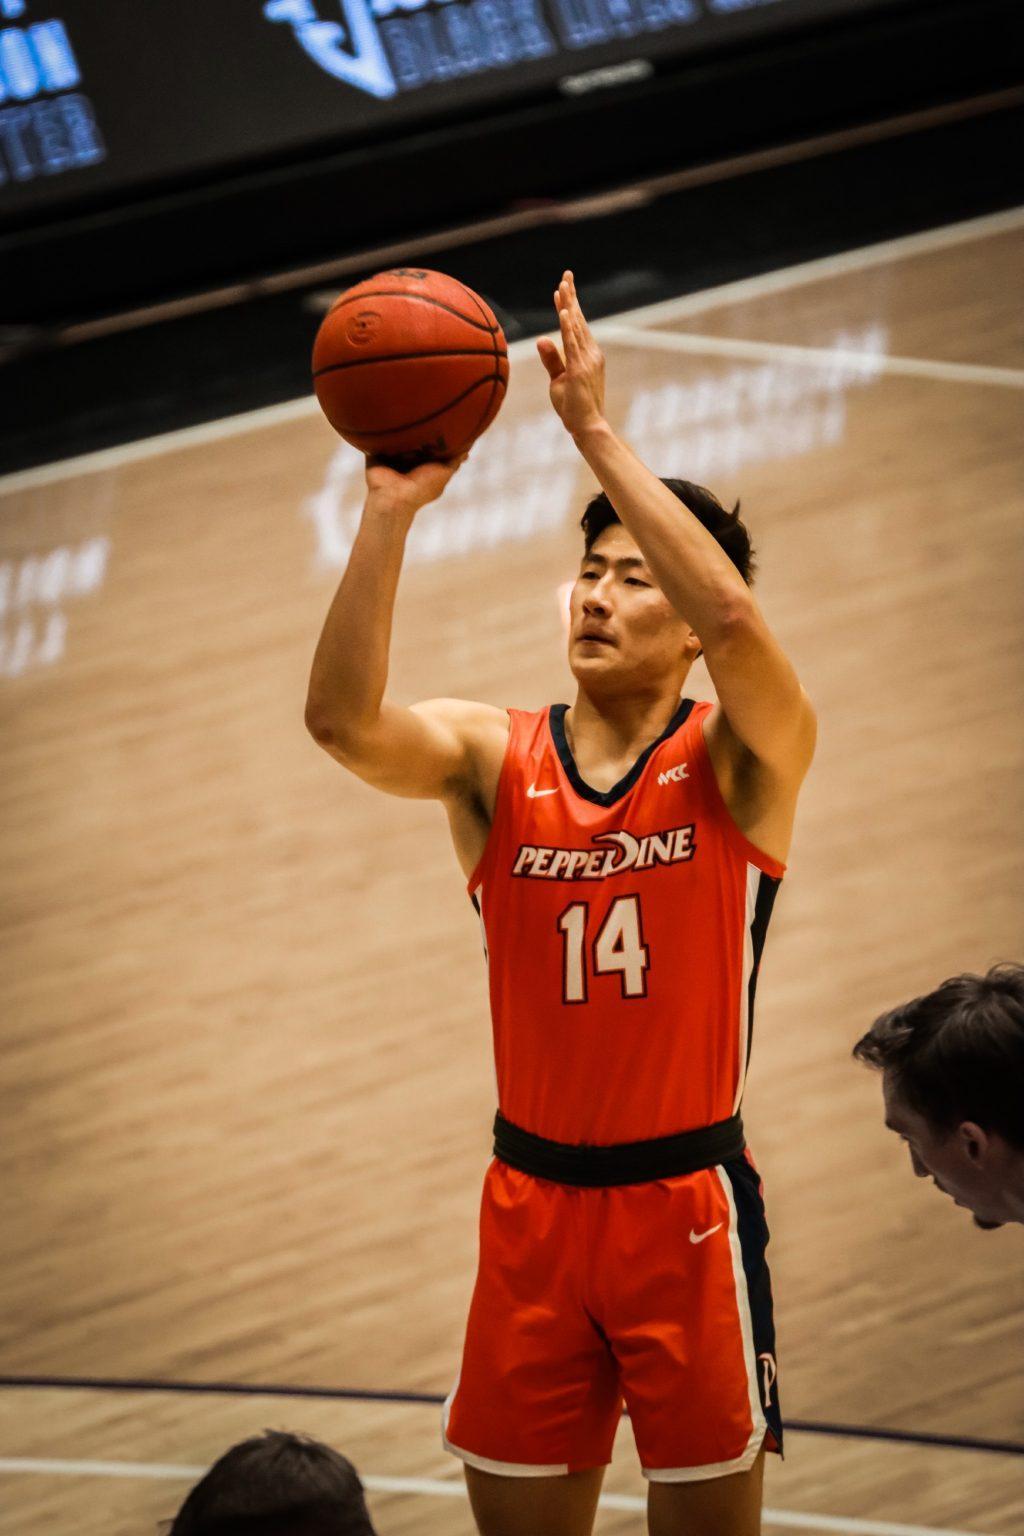 Yoon attempts a free throw during a game. Yoon got his first career start versus Portland on Feb. 19, when he scored seven points on 2-5 shooting.